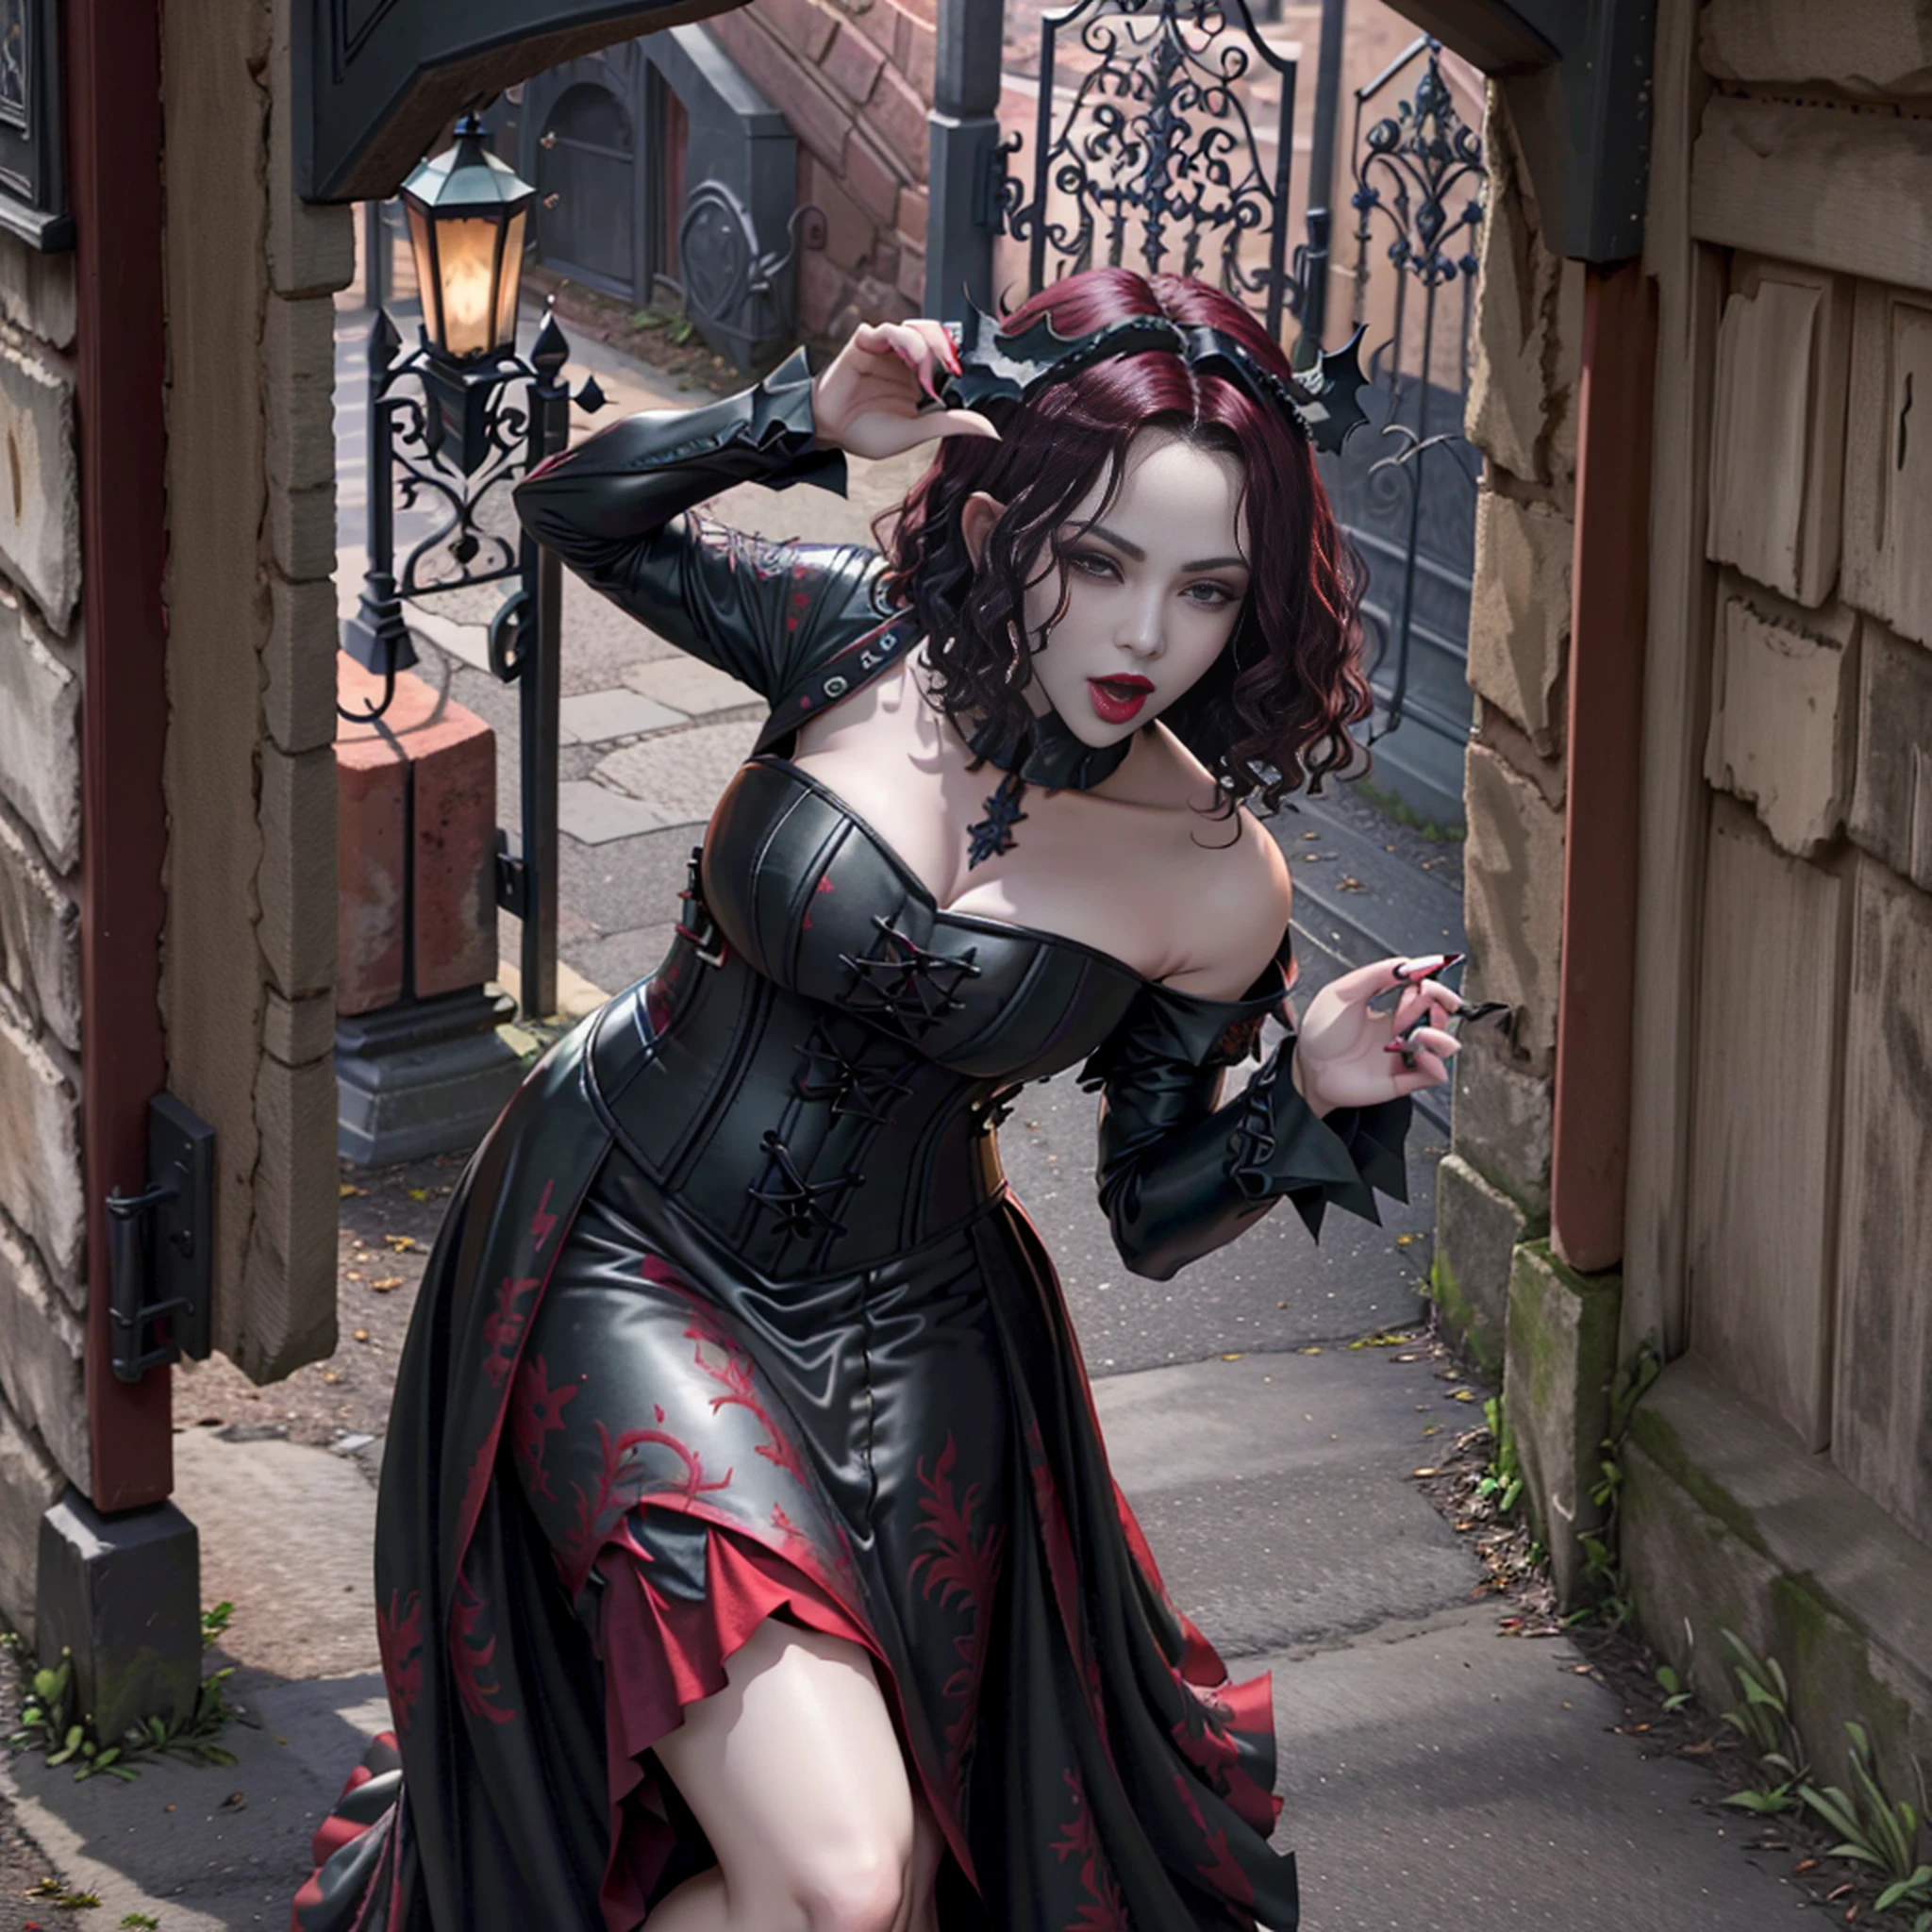 master part, extremely high quality, HD 8k, 1 vampire, spooky ambiance, lo gothic, gaping mouth, vampire's teeth, bare fangs, blood red lips, mouth bleeding, tongue licking greedily, (natta :1.8), long burgundy hair, strange expression, elf ears, Black lace dress, sexly, vampyre, (graveyard :0.8), (Exquisite iron gate in European style :1.4), full of thorns and roses, Under the Red Moon, tails, ..bat, bloodstains